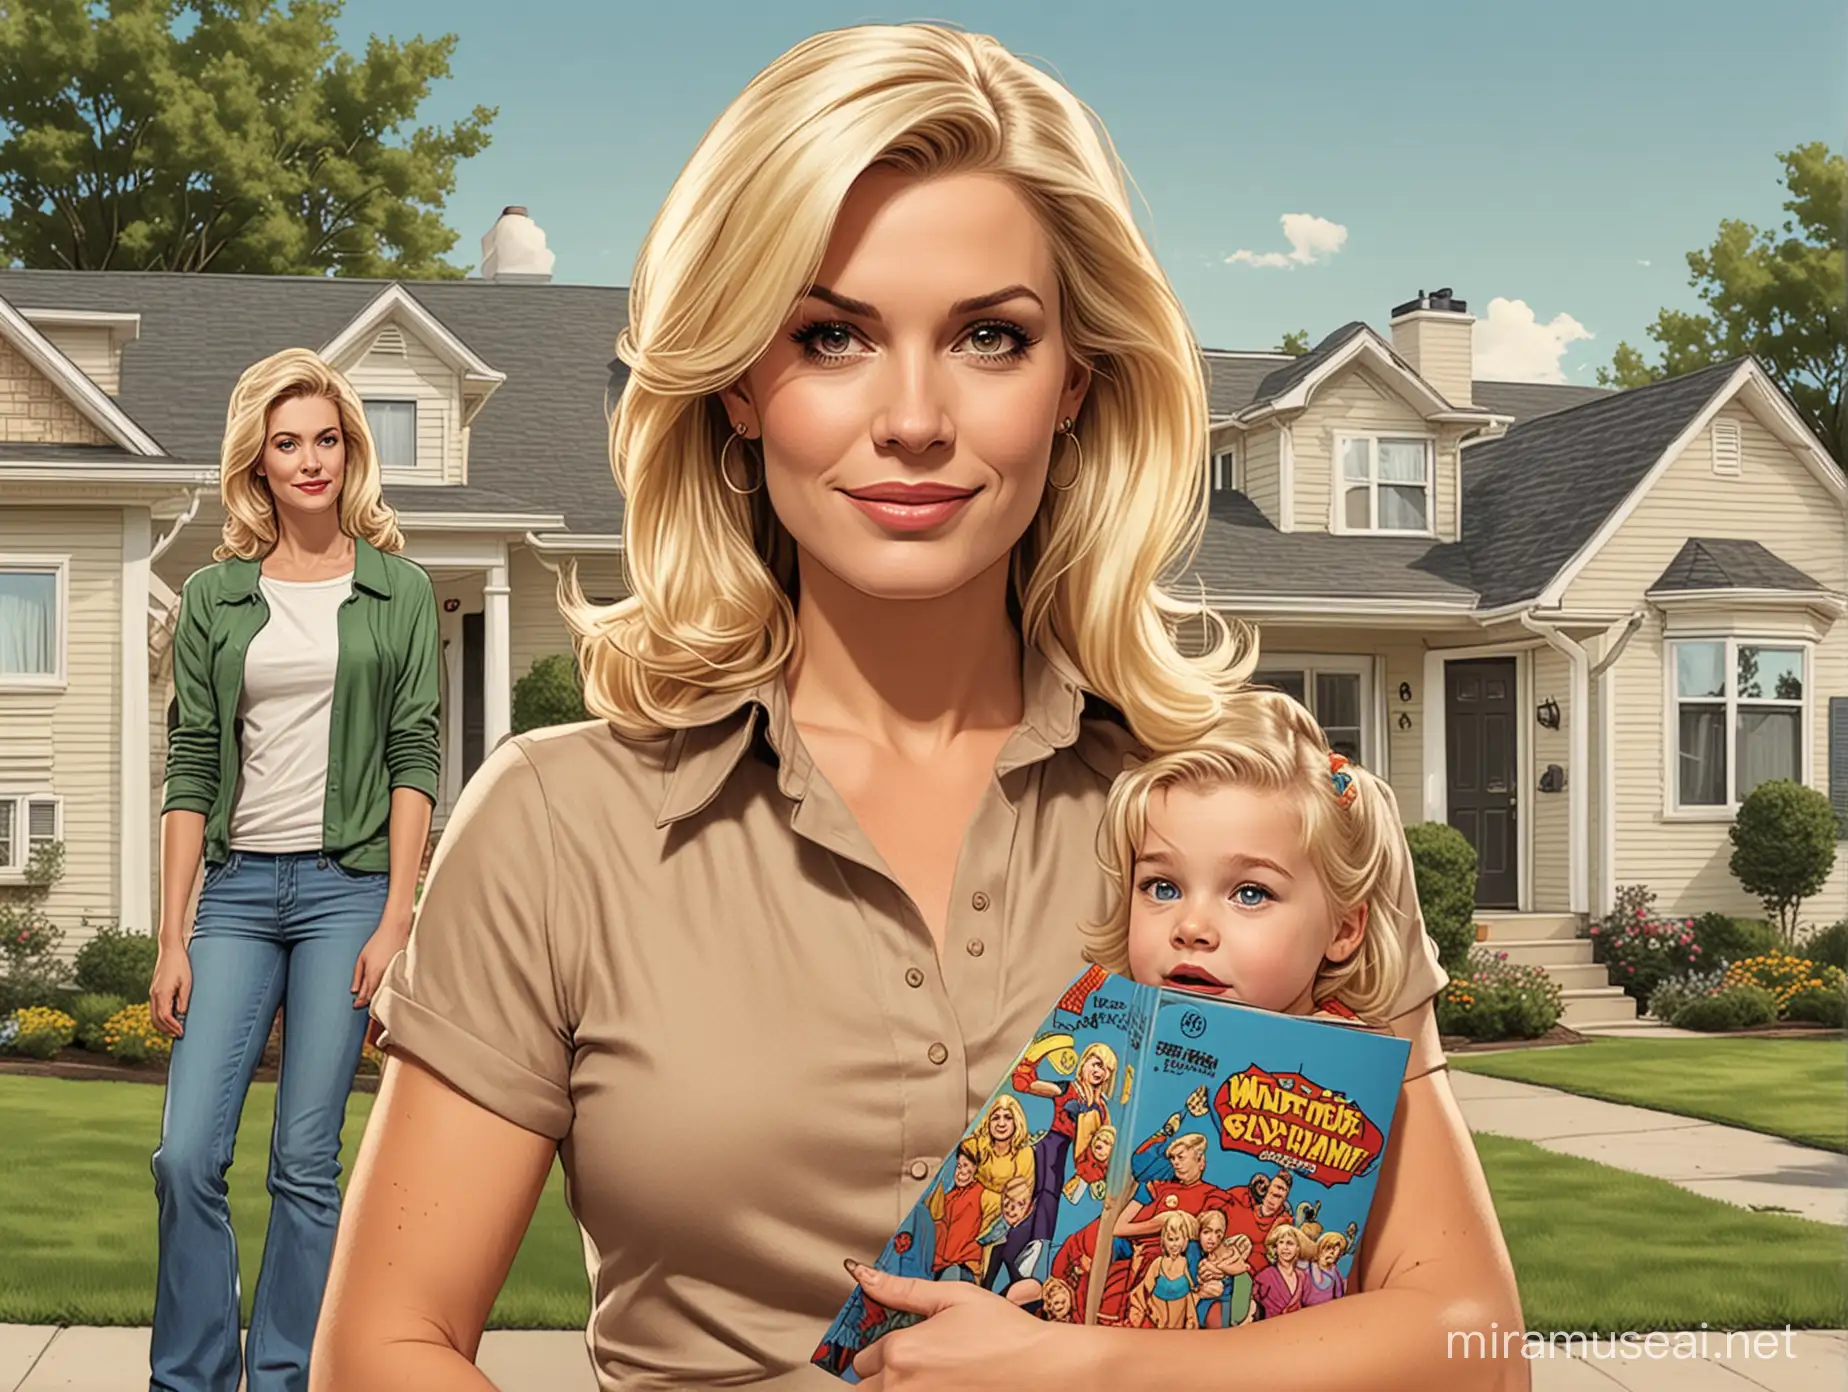 A grown blonde lady living a normal Suburban life with her family, comic book cartoon syle rendering.